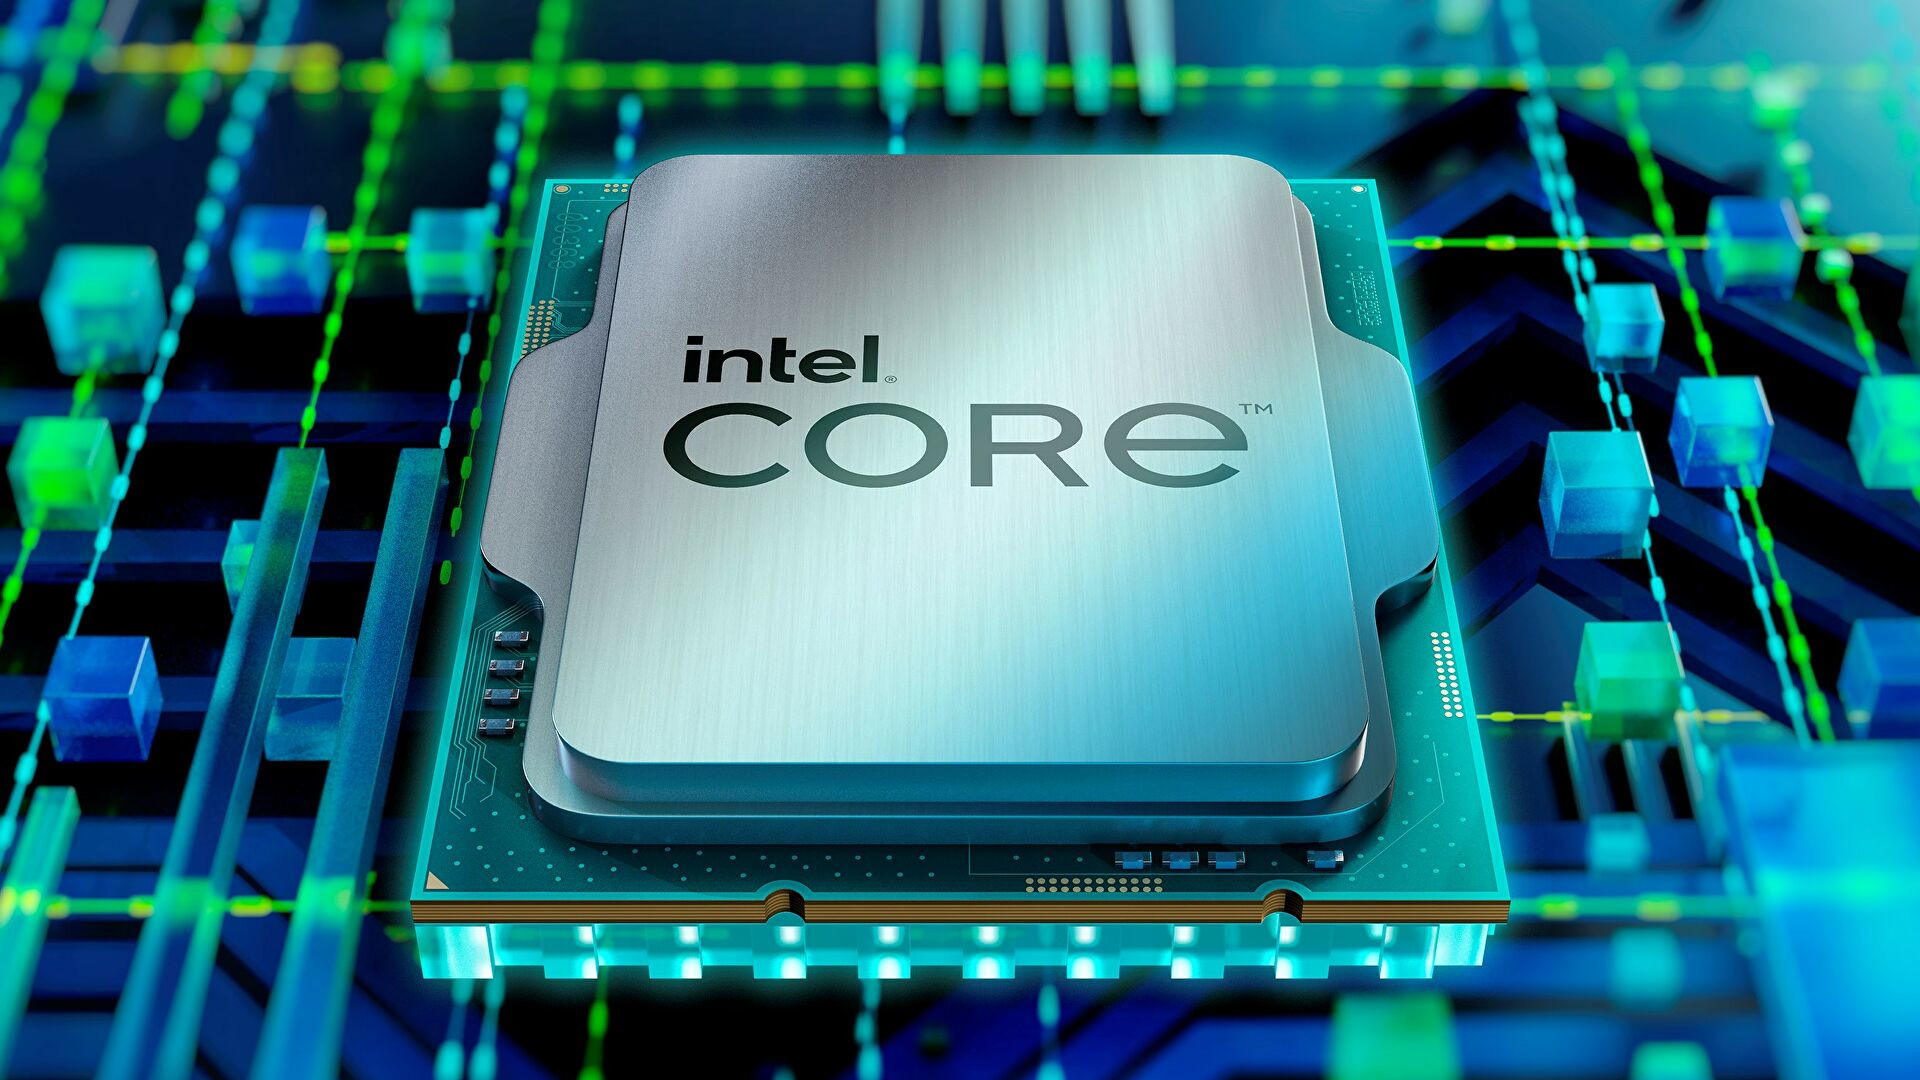 New Intel 13th Gen Core CPUs may deliver up to 53% more performance